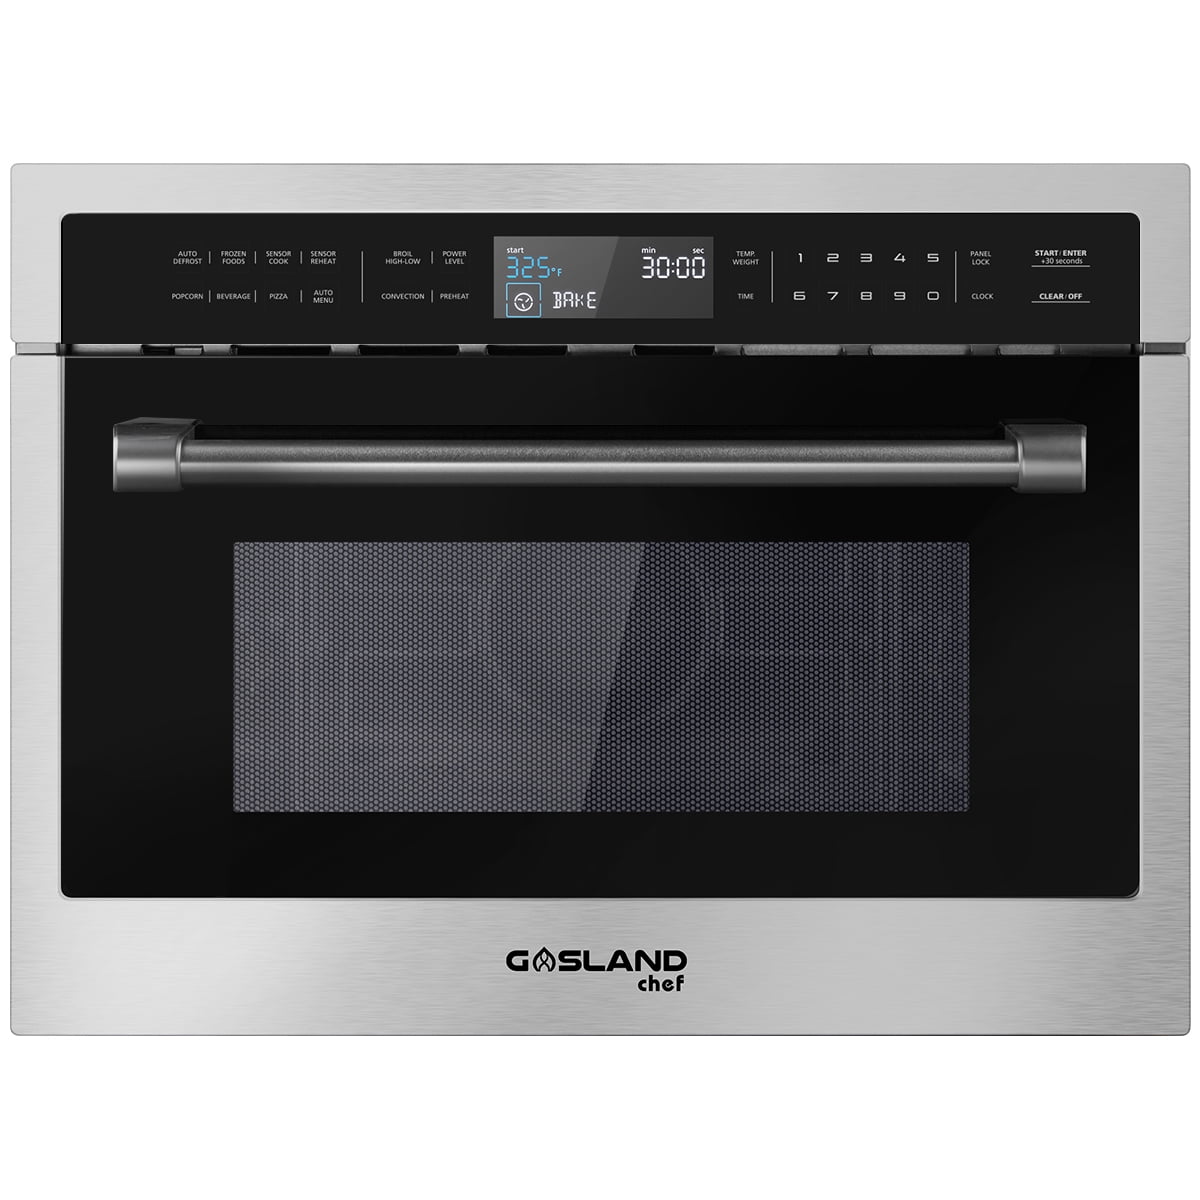 GE 24 Built-in Dishwasher - Bisque or Off-white